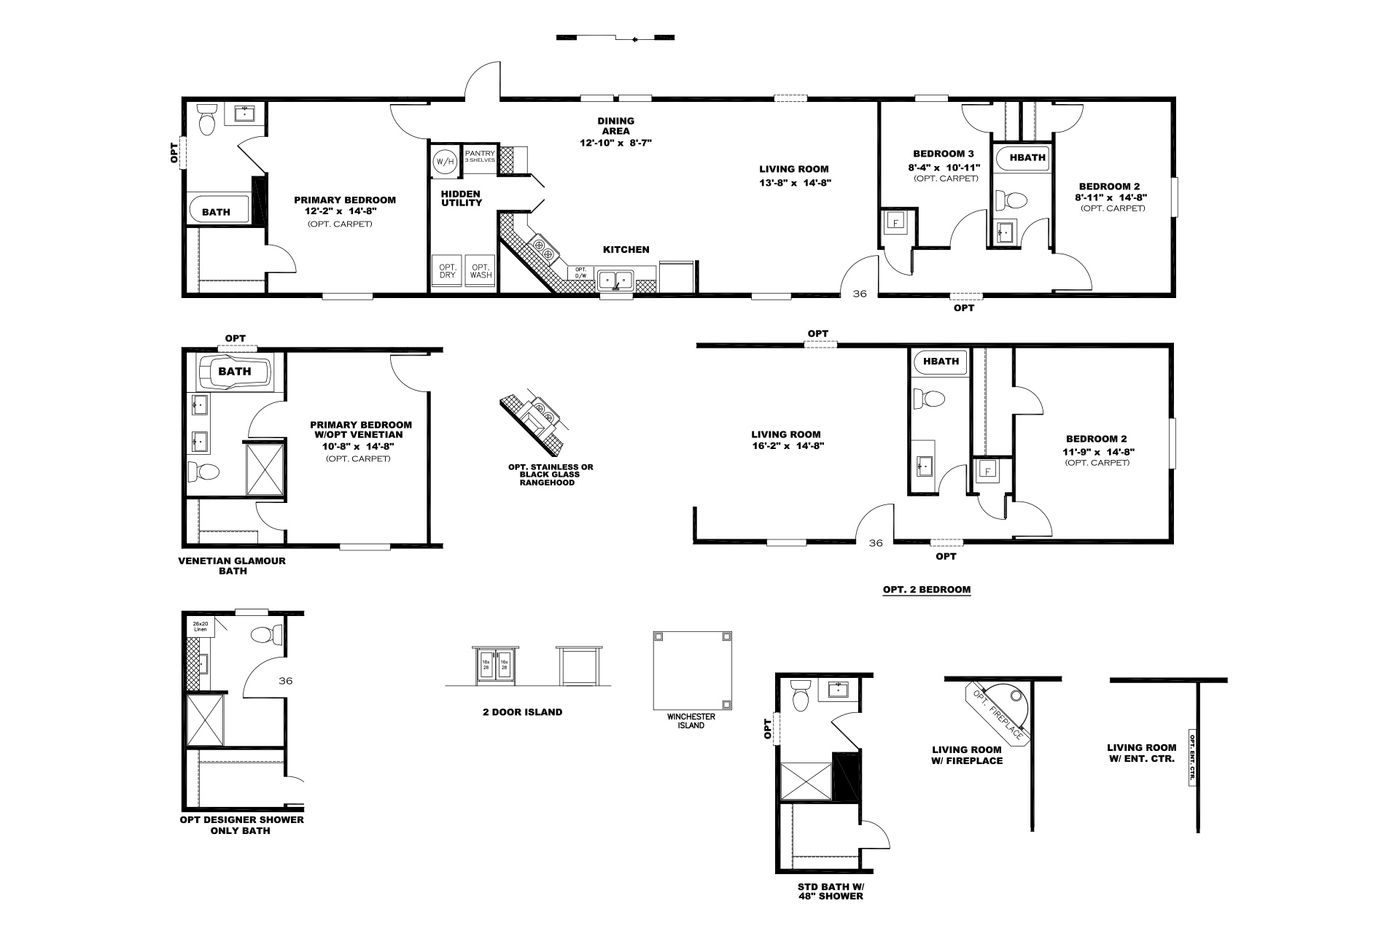 The BLAZER 76 P Floor Plan. This Manufactured Mobile Home features 3 bedrooms and 2 baths.